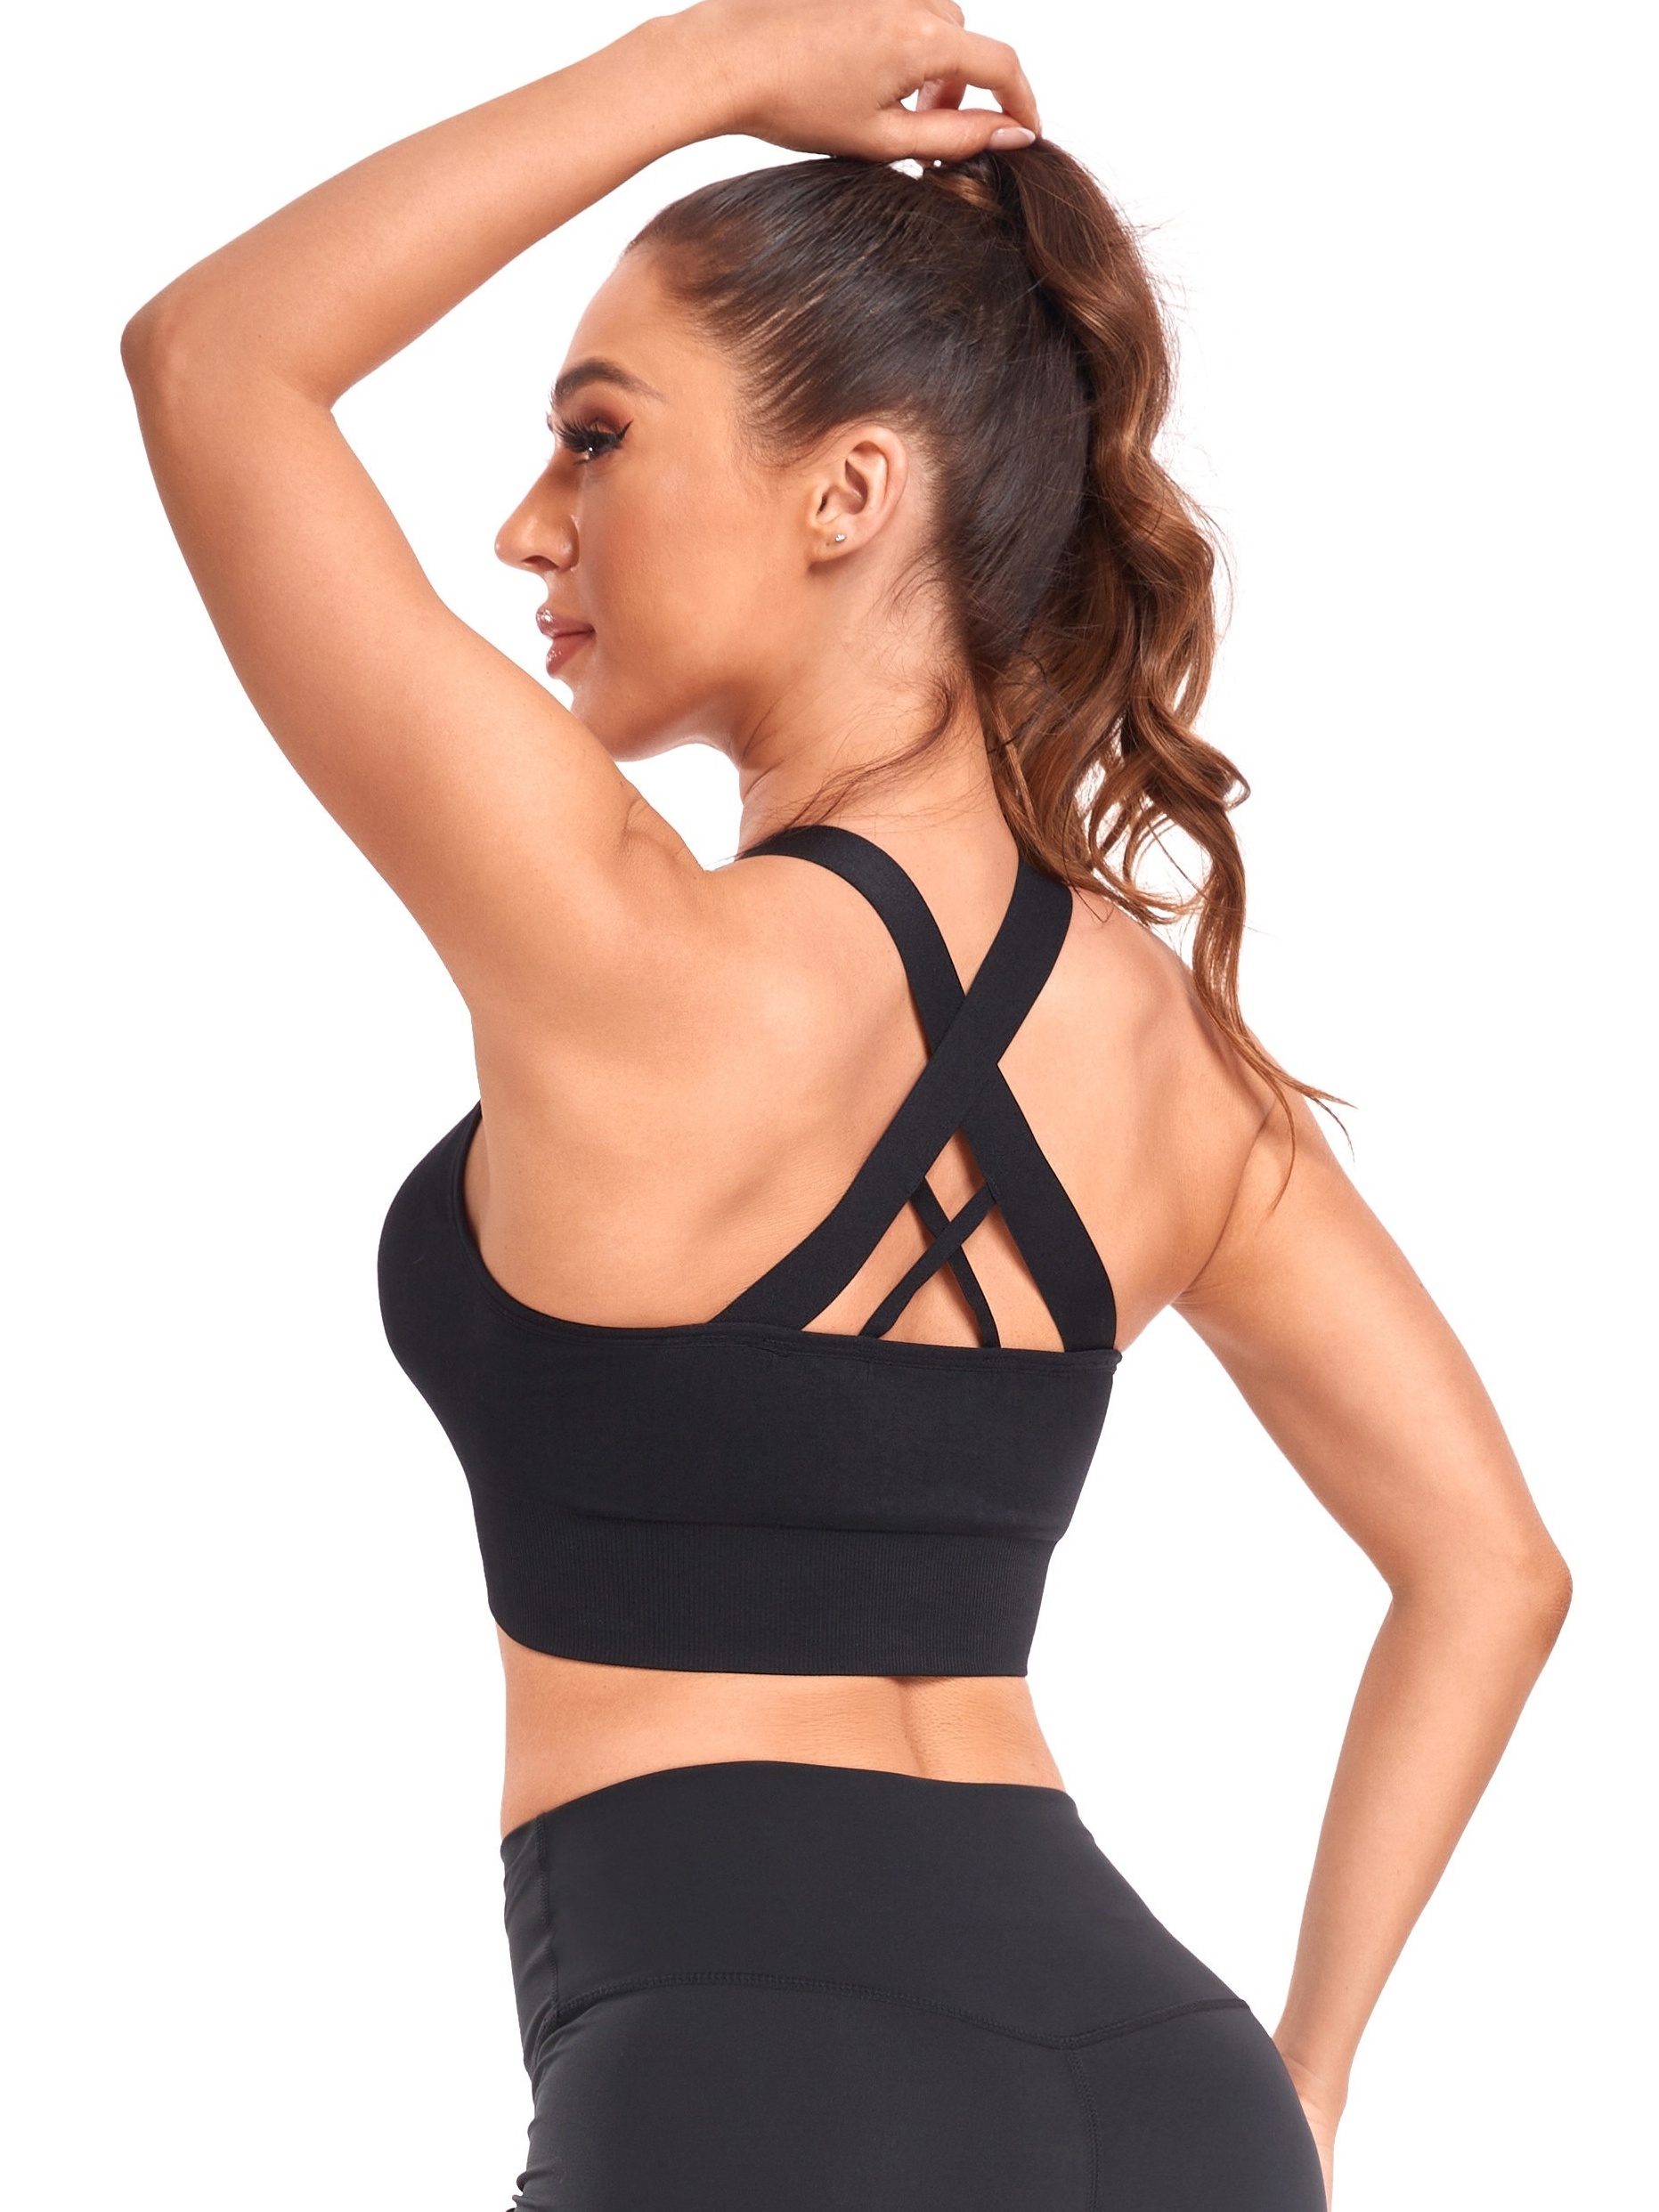 High-Intensity Sports Underwear, Beautiful Back Bra Fitness Yoga  Clothes,for Fitness Workout Running Yoga Tank Tops (Black Small)